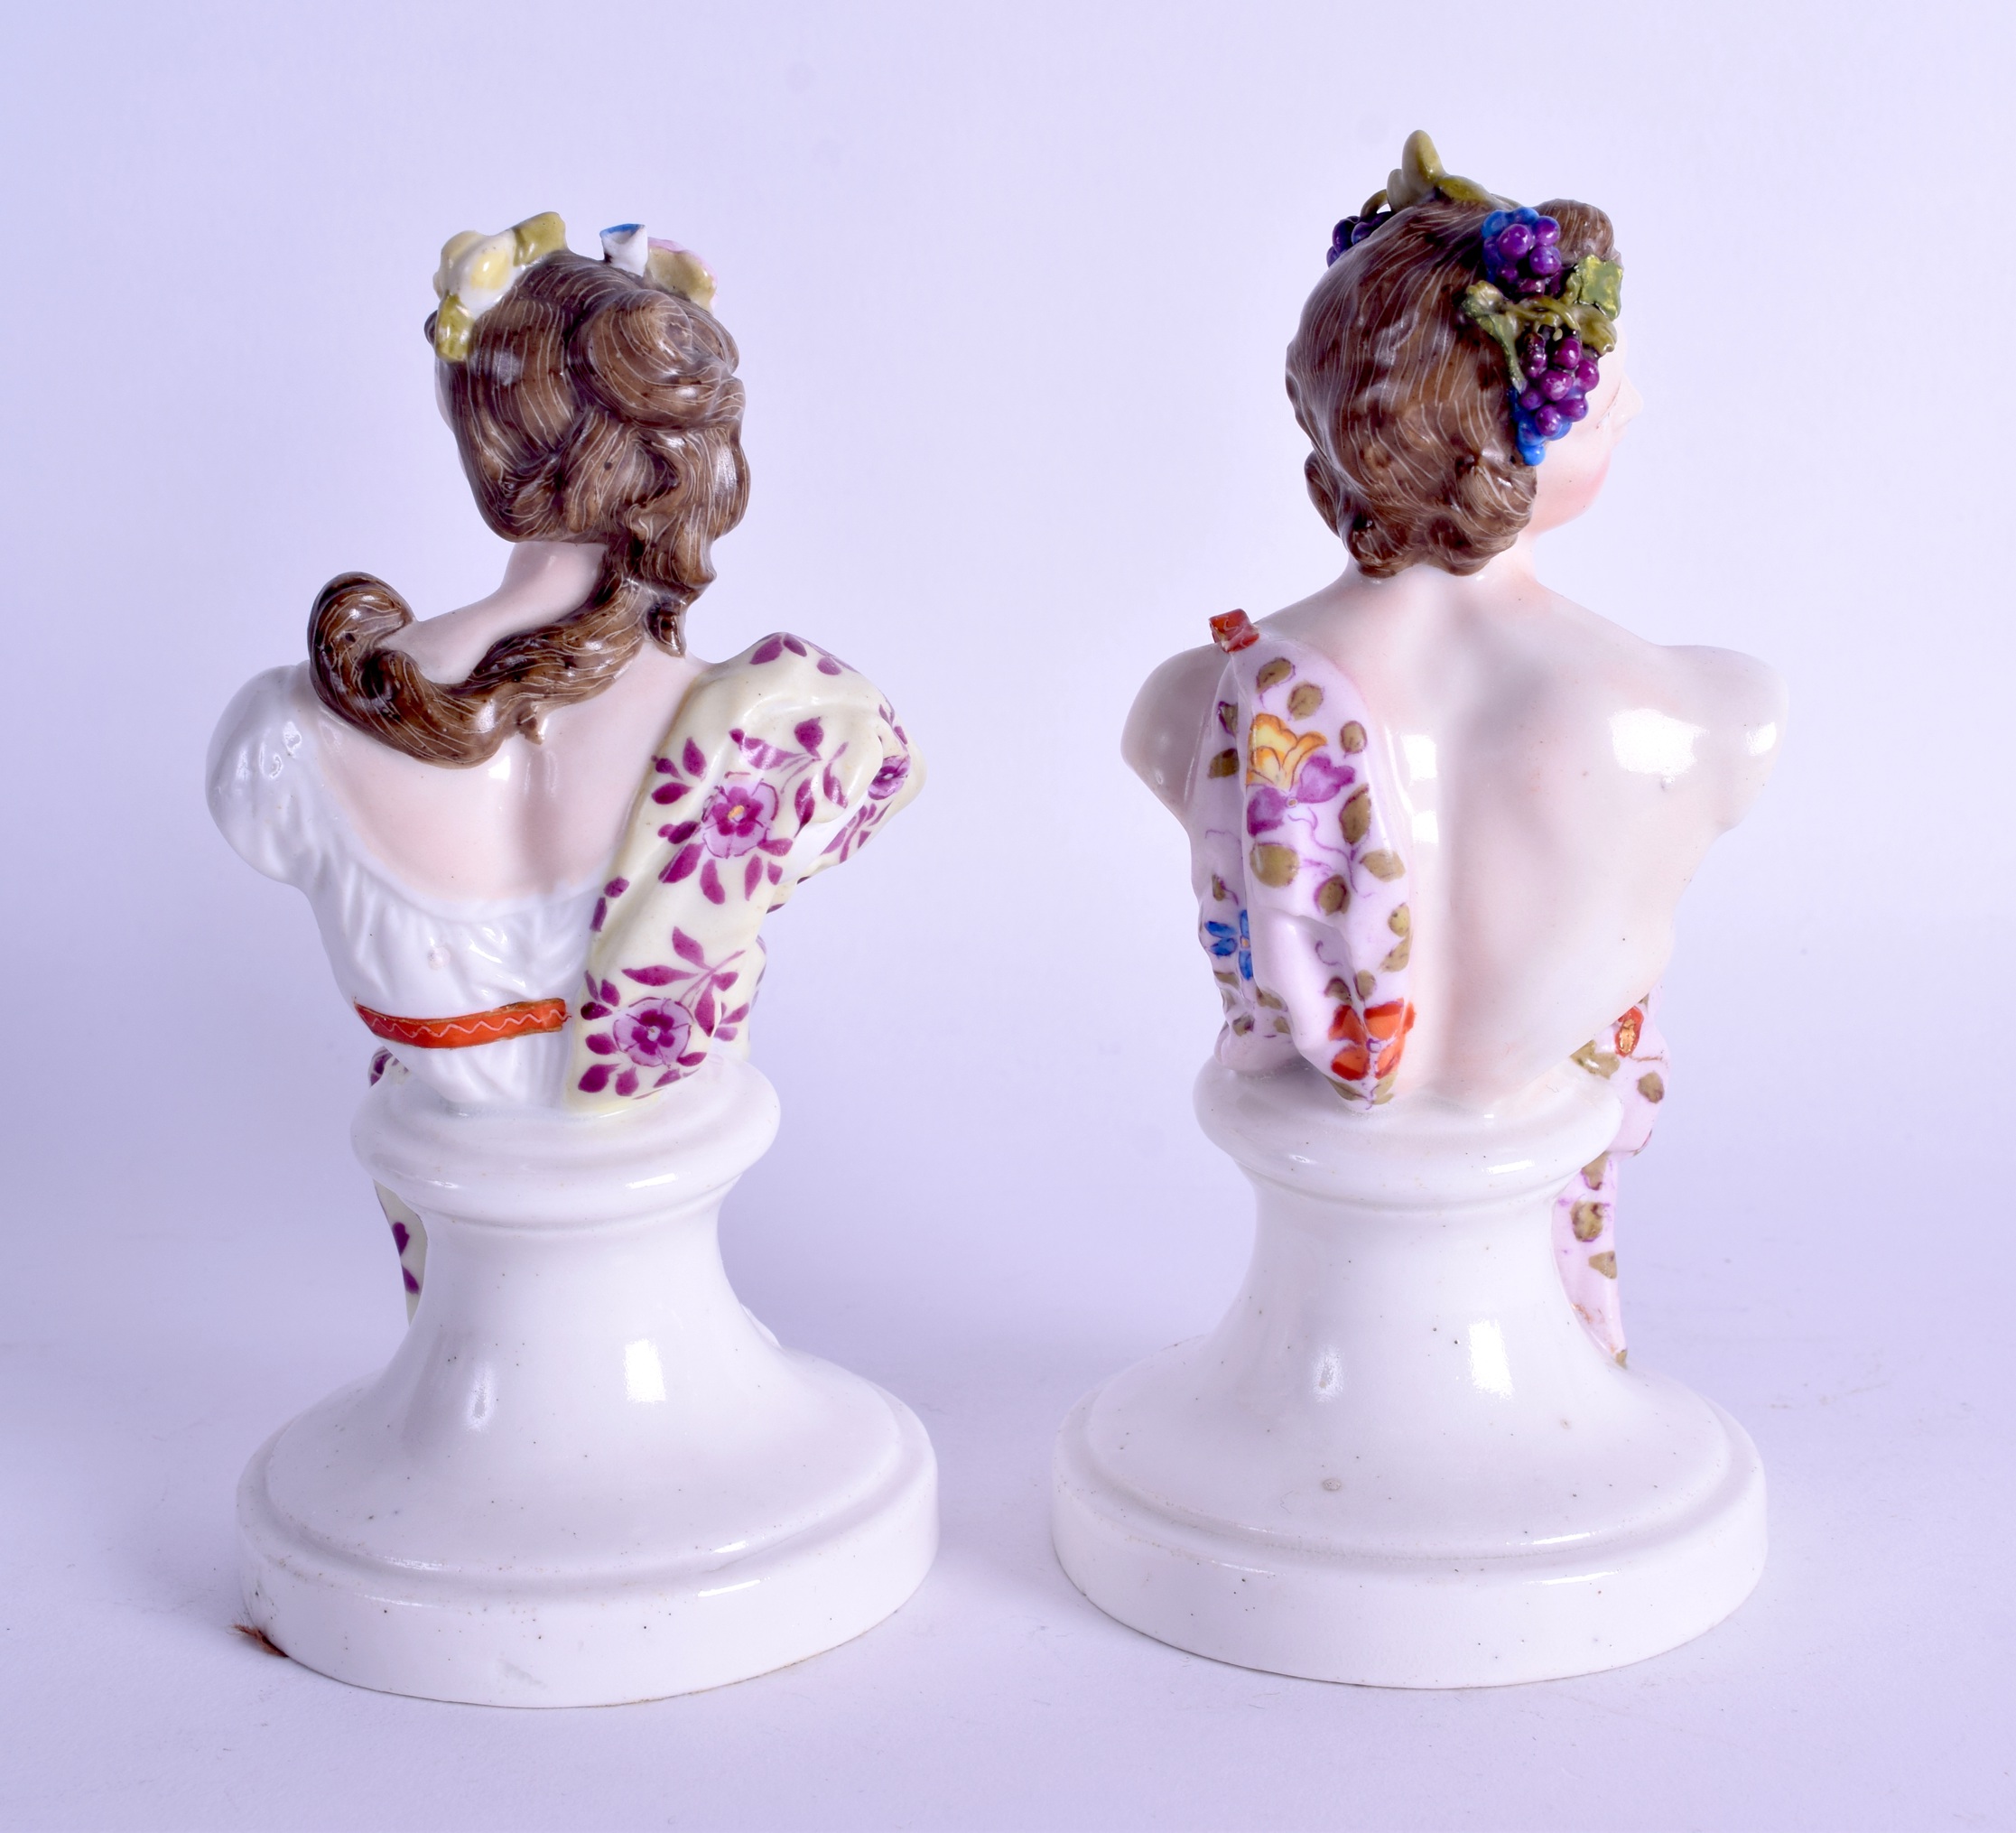 A PAIR OF 19TH CENTURY GERMAN PORCELAIN FIGURAL BUSTS painted with foliage and vines. 15 cm high. - Image 2 of 3